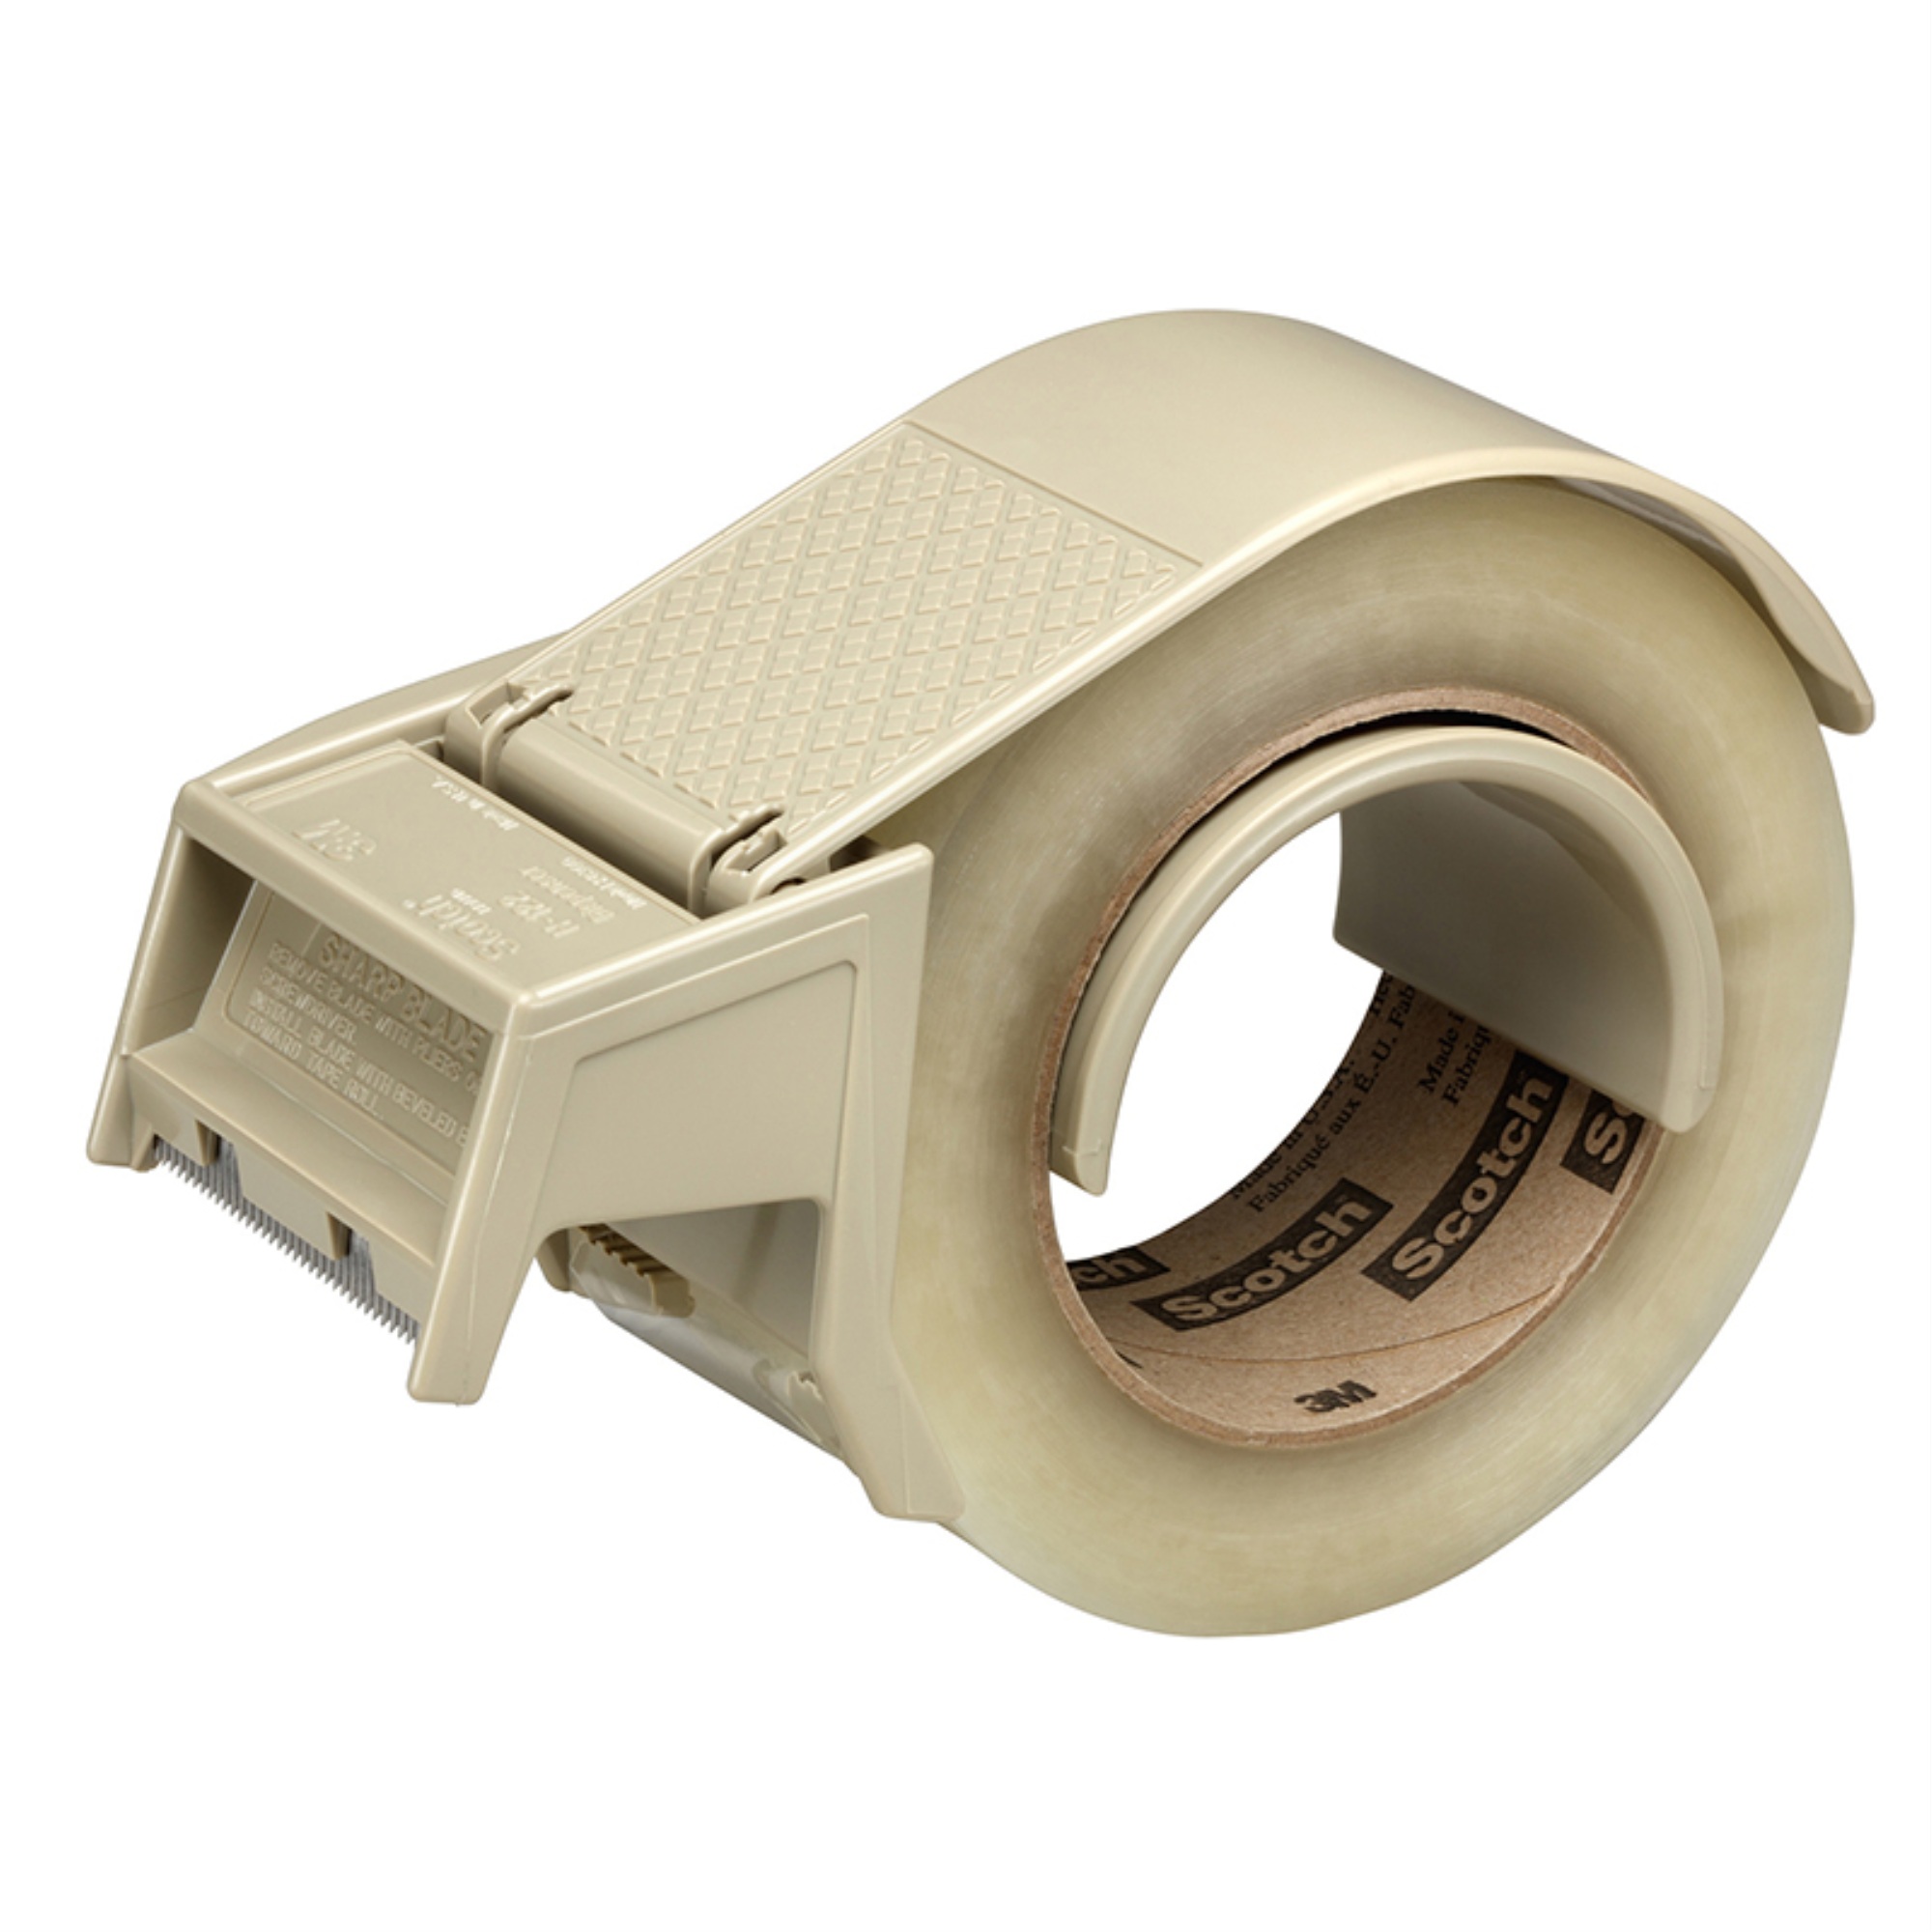 Scotch Packaging/Sealing Tape Hand Dispenser - Holds Total 1 Tape(s) - 3" Core - Refillable - Adjustable Tension Mechanism, Retr